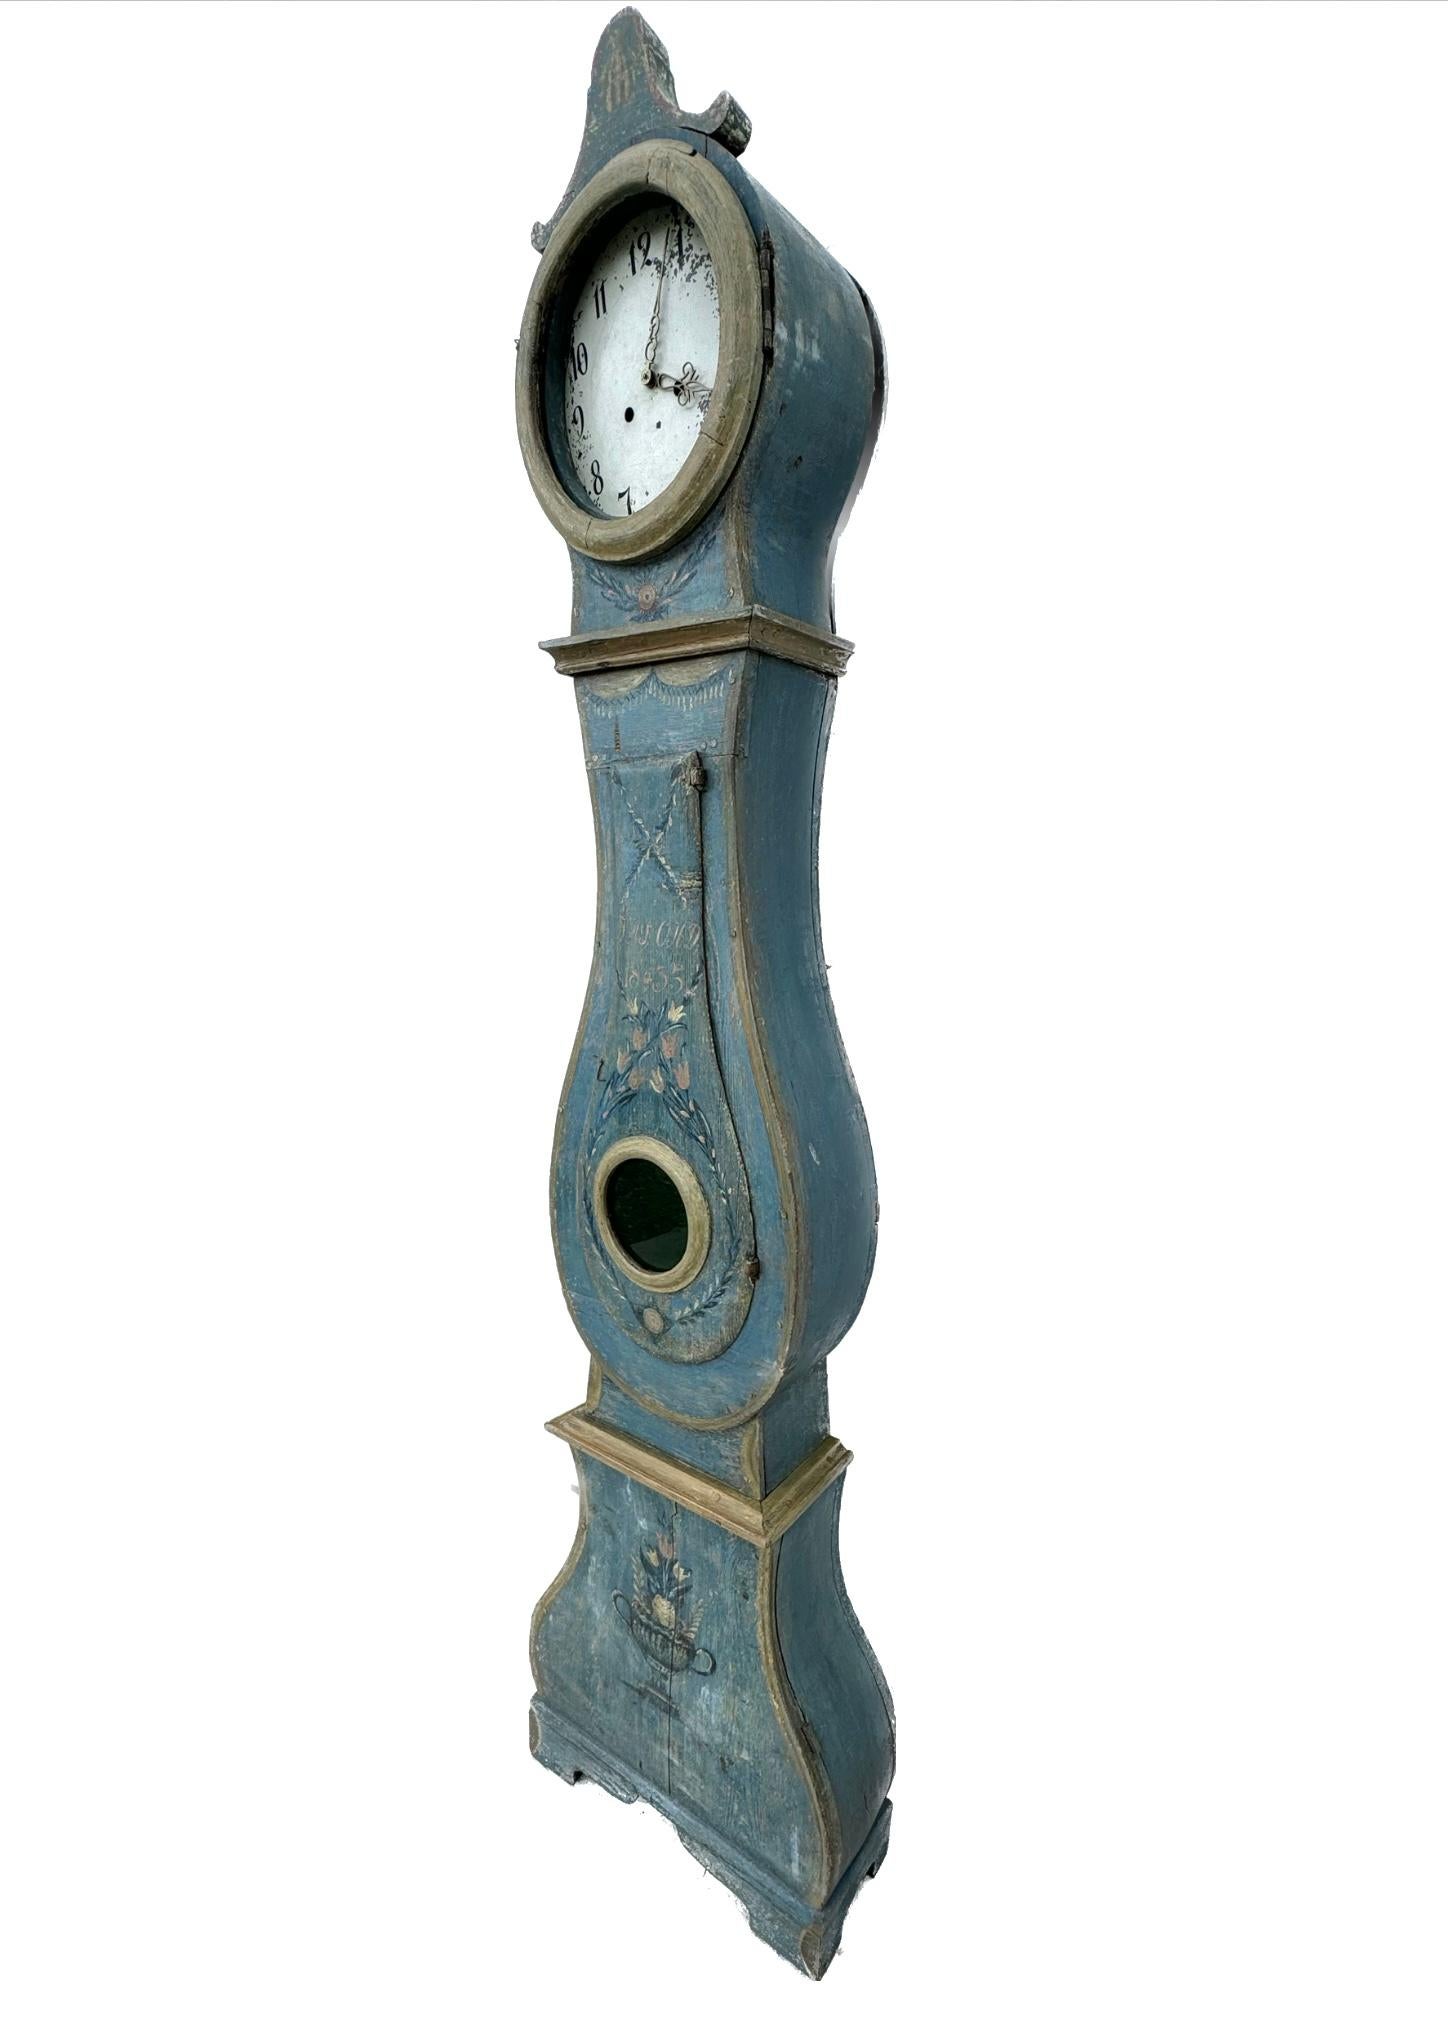 19th century Swedish Gustavian longcase painted clock, featuring an elegant and slender wooden case with decorative details. Scraped down to the original Polychromed painted and hand-made clock is painted sky blue with floral designs throughout